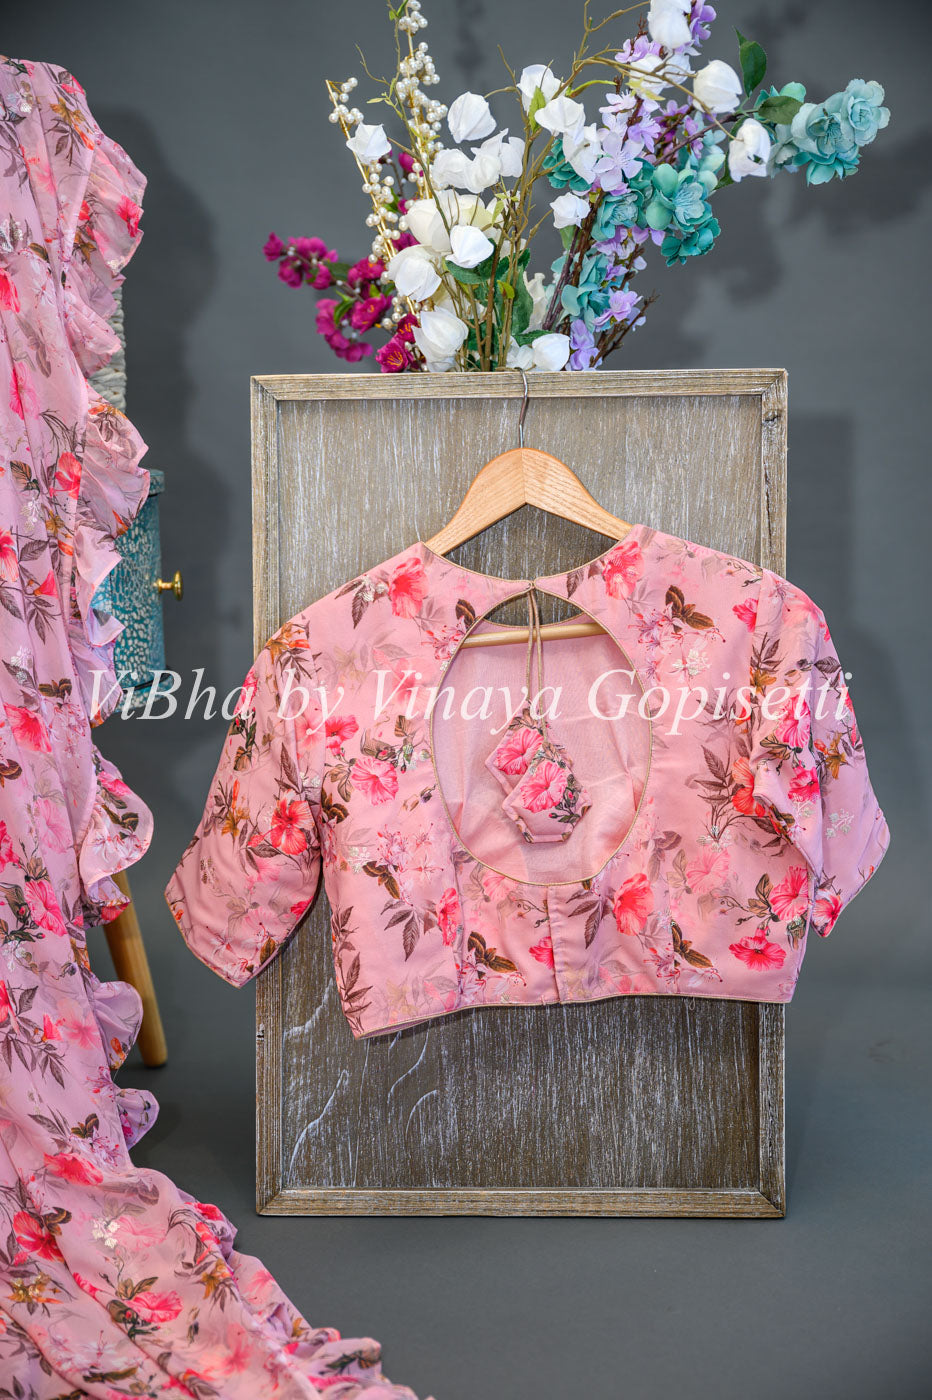 Peach Floral Saree And Blouse With Ruffle Border